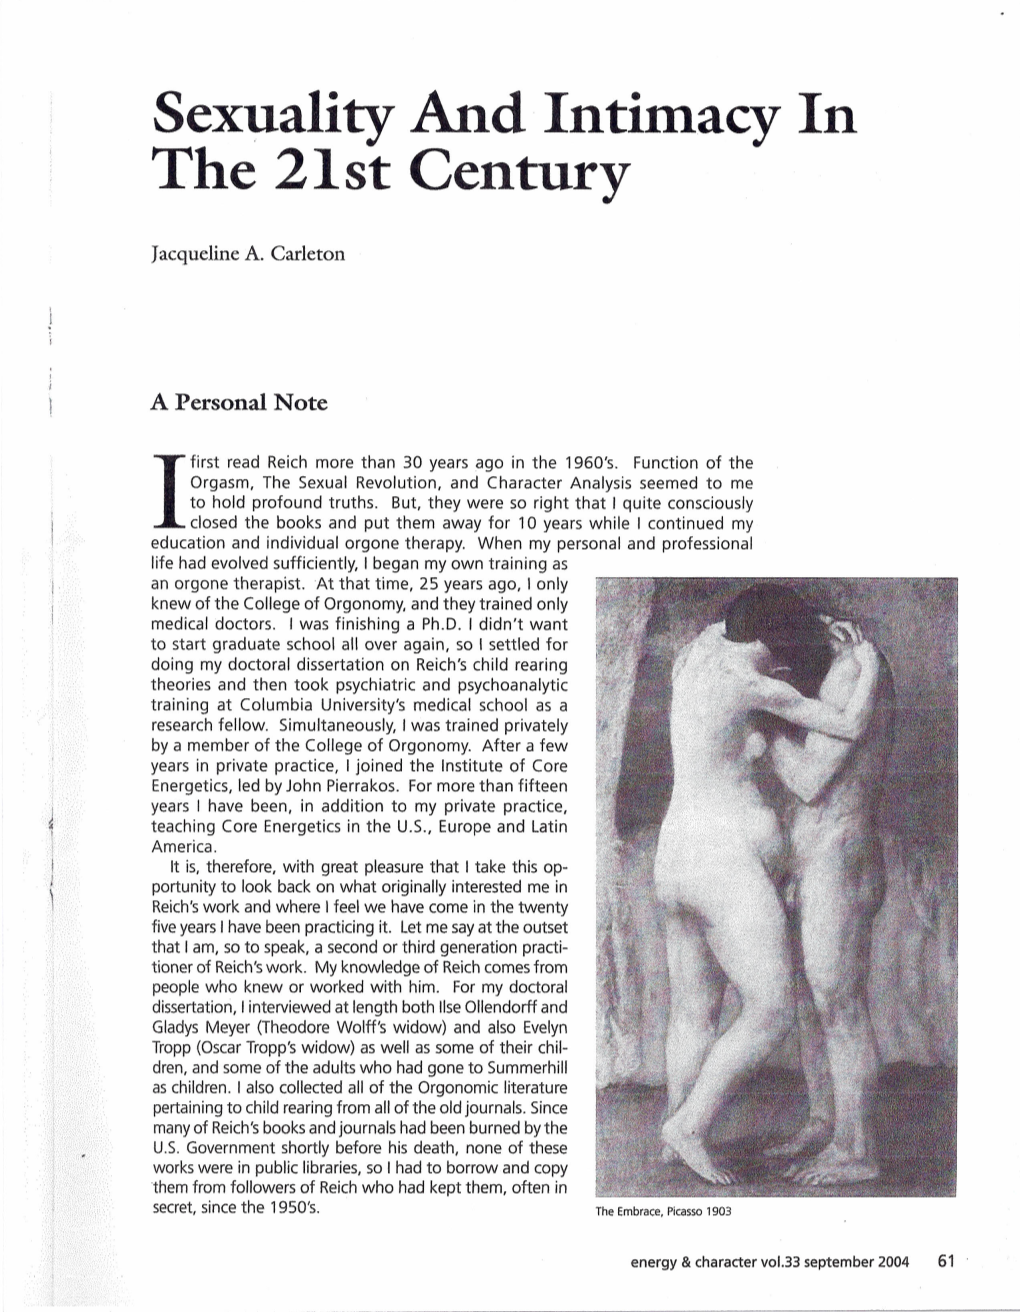 Sexuality and Intimacy in the 21St Century